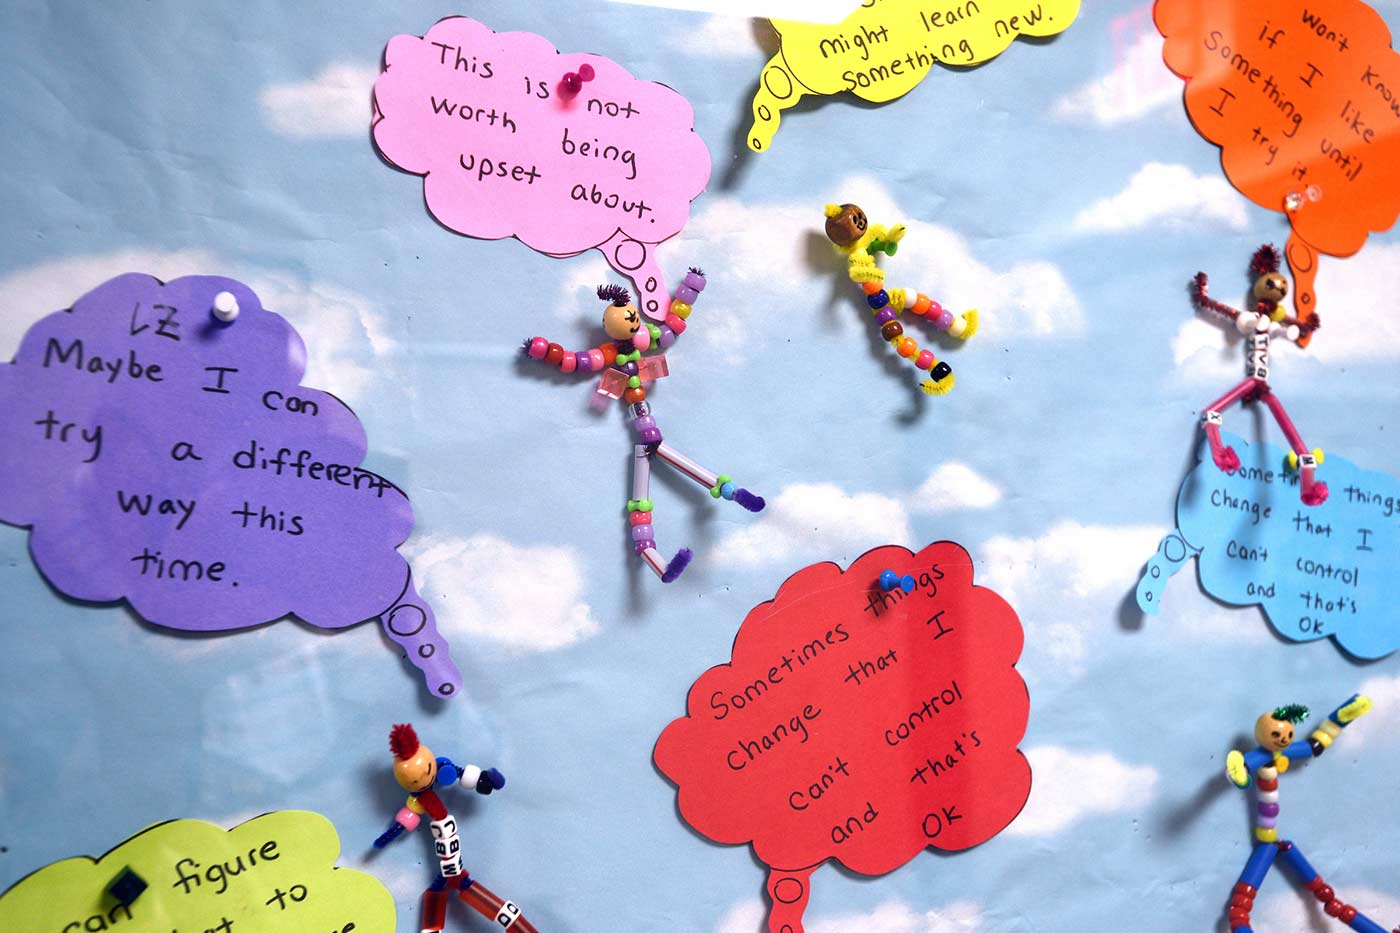 Natchaug student art with colorful emotional coping methods written out among pipe cleaner dolls made with plastic beads